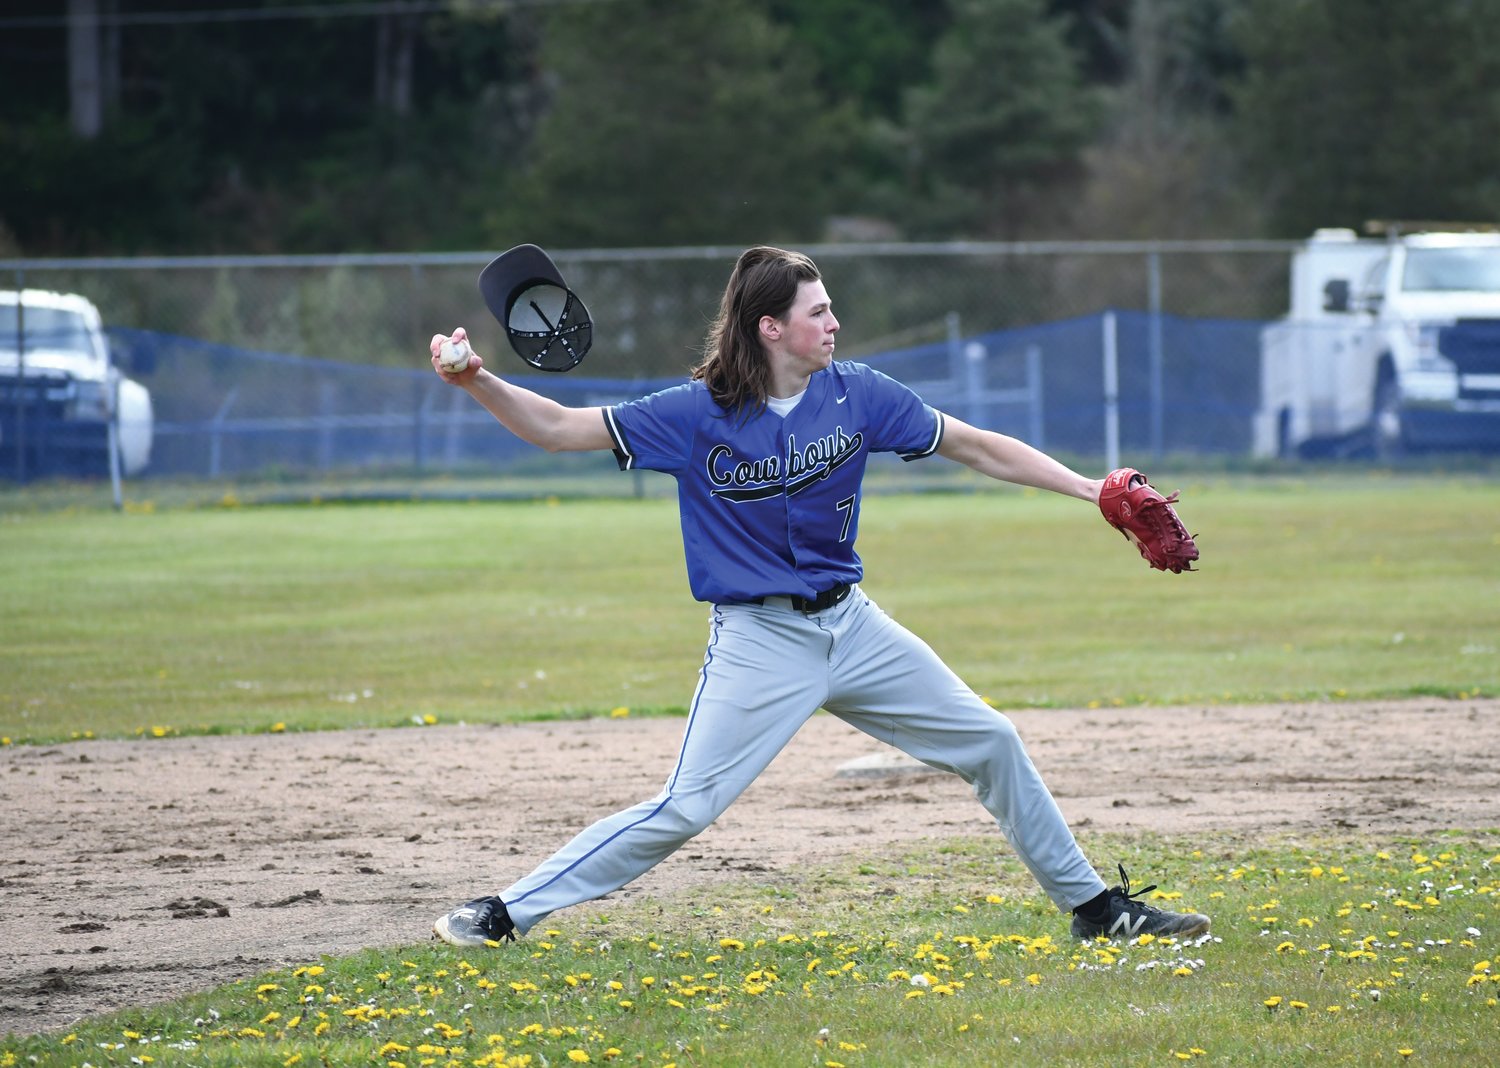 Playing shortstop for the Rivals, Ryan Popp loses his hat while throwing to first base.